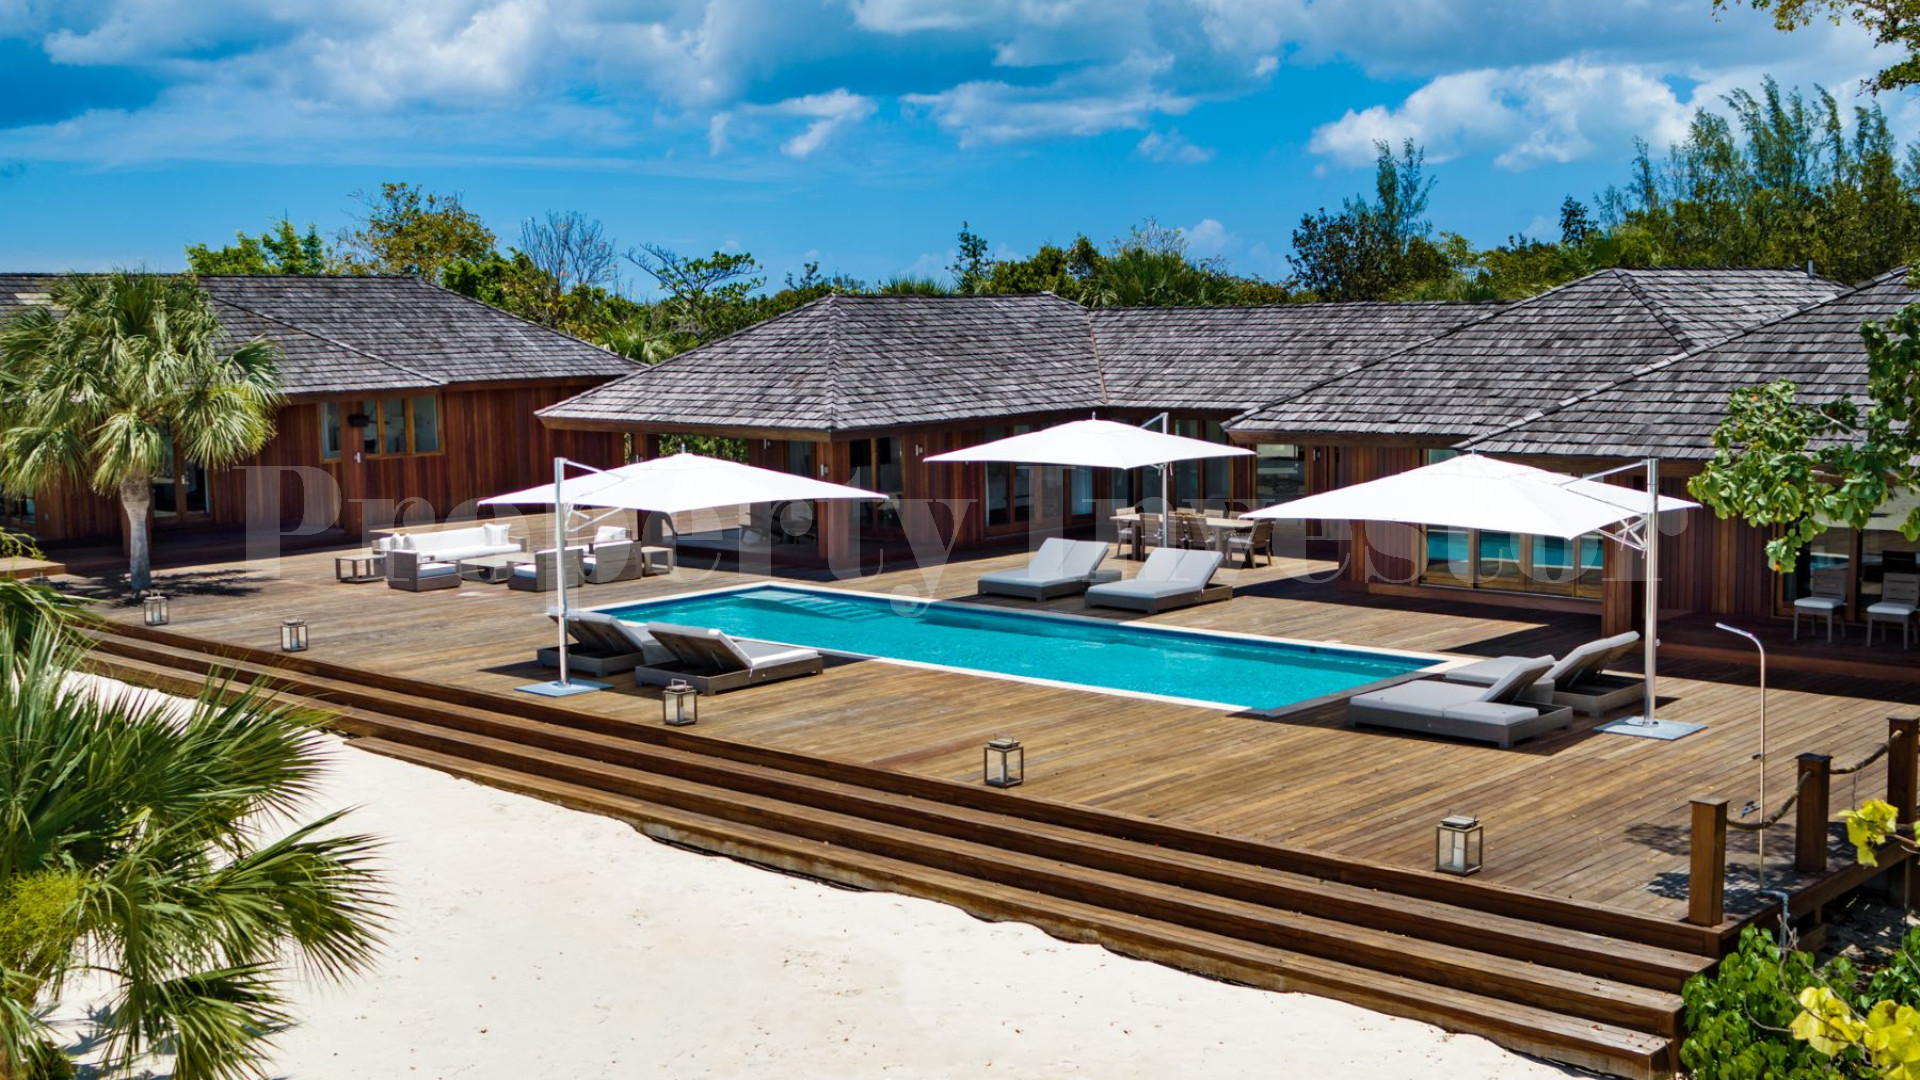 Exceptional 3 Bedroom Luxury Beachfront Estate for Sale on Parrot Cay, Turks & Caicos